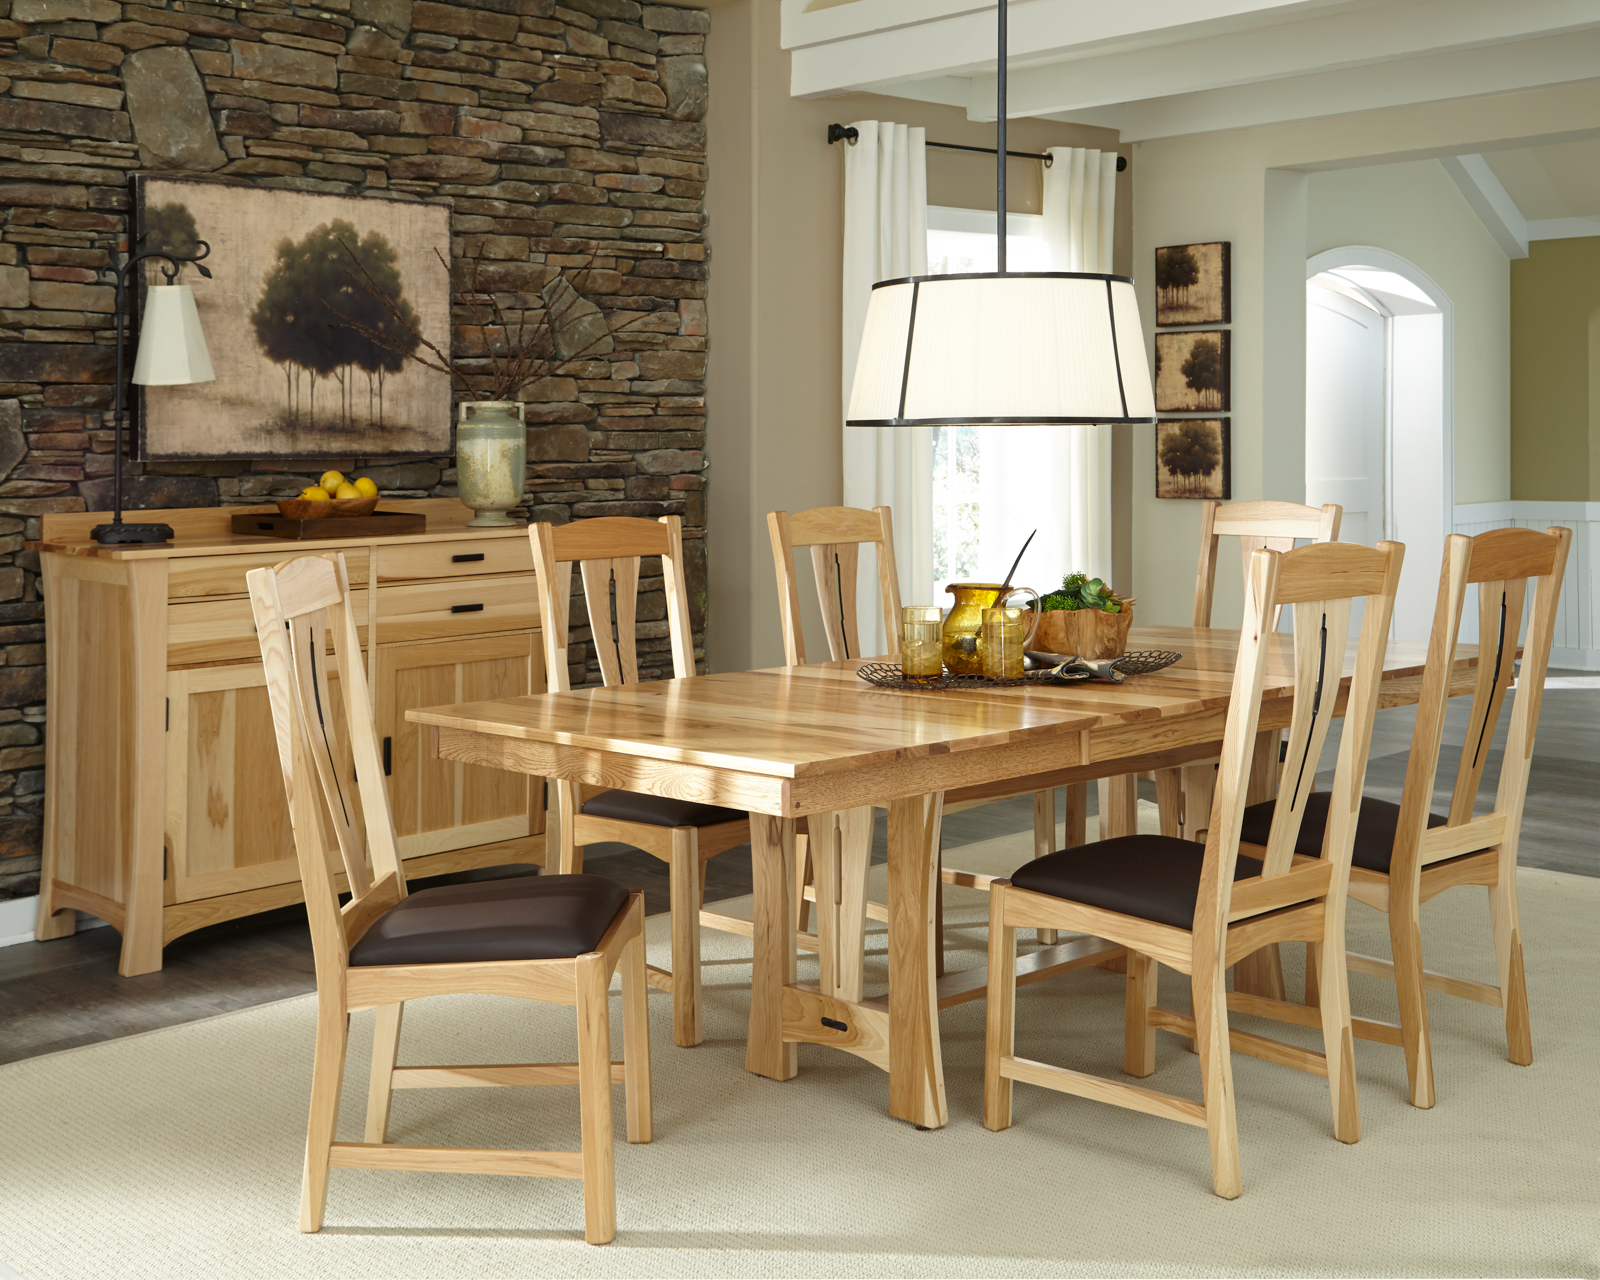 Dining Room Furniture Cattail Bungalow, Dining Room Tables Indianapolis